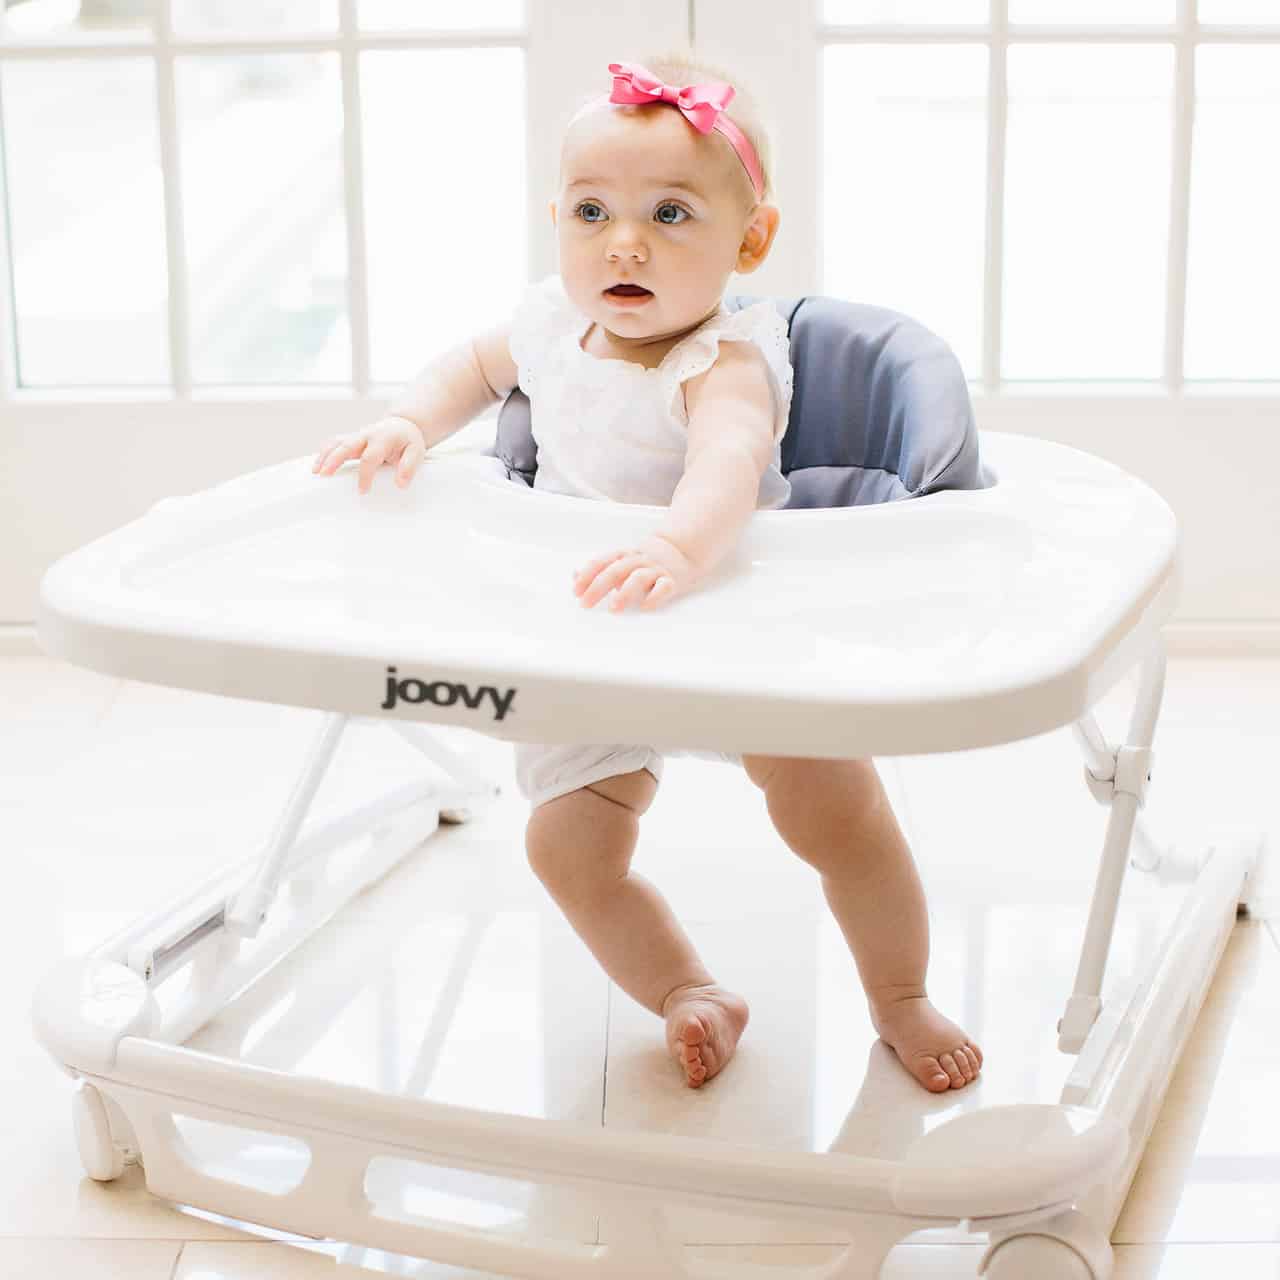 when to use baby walker